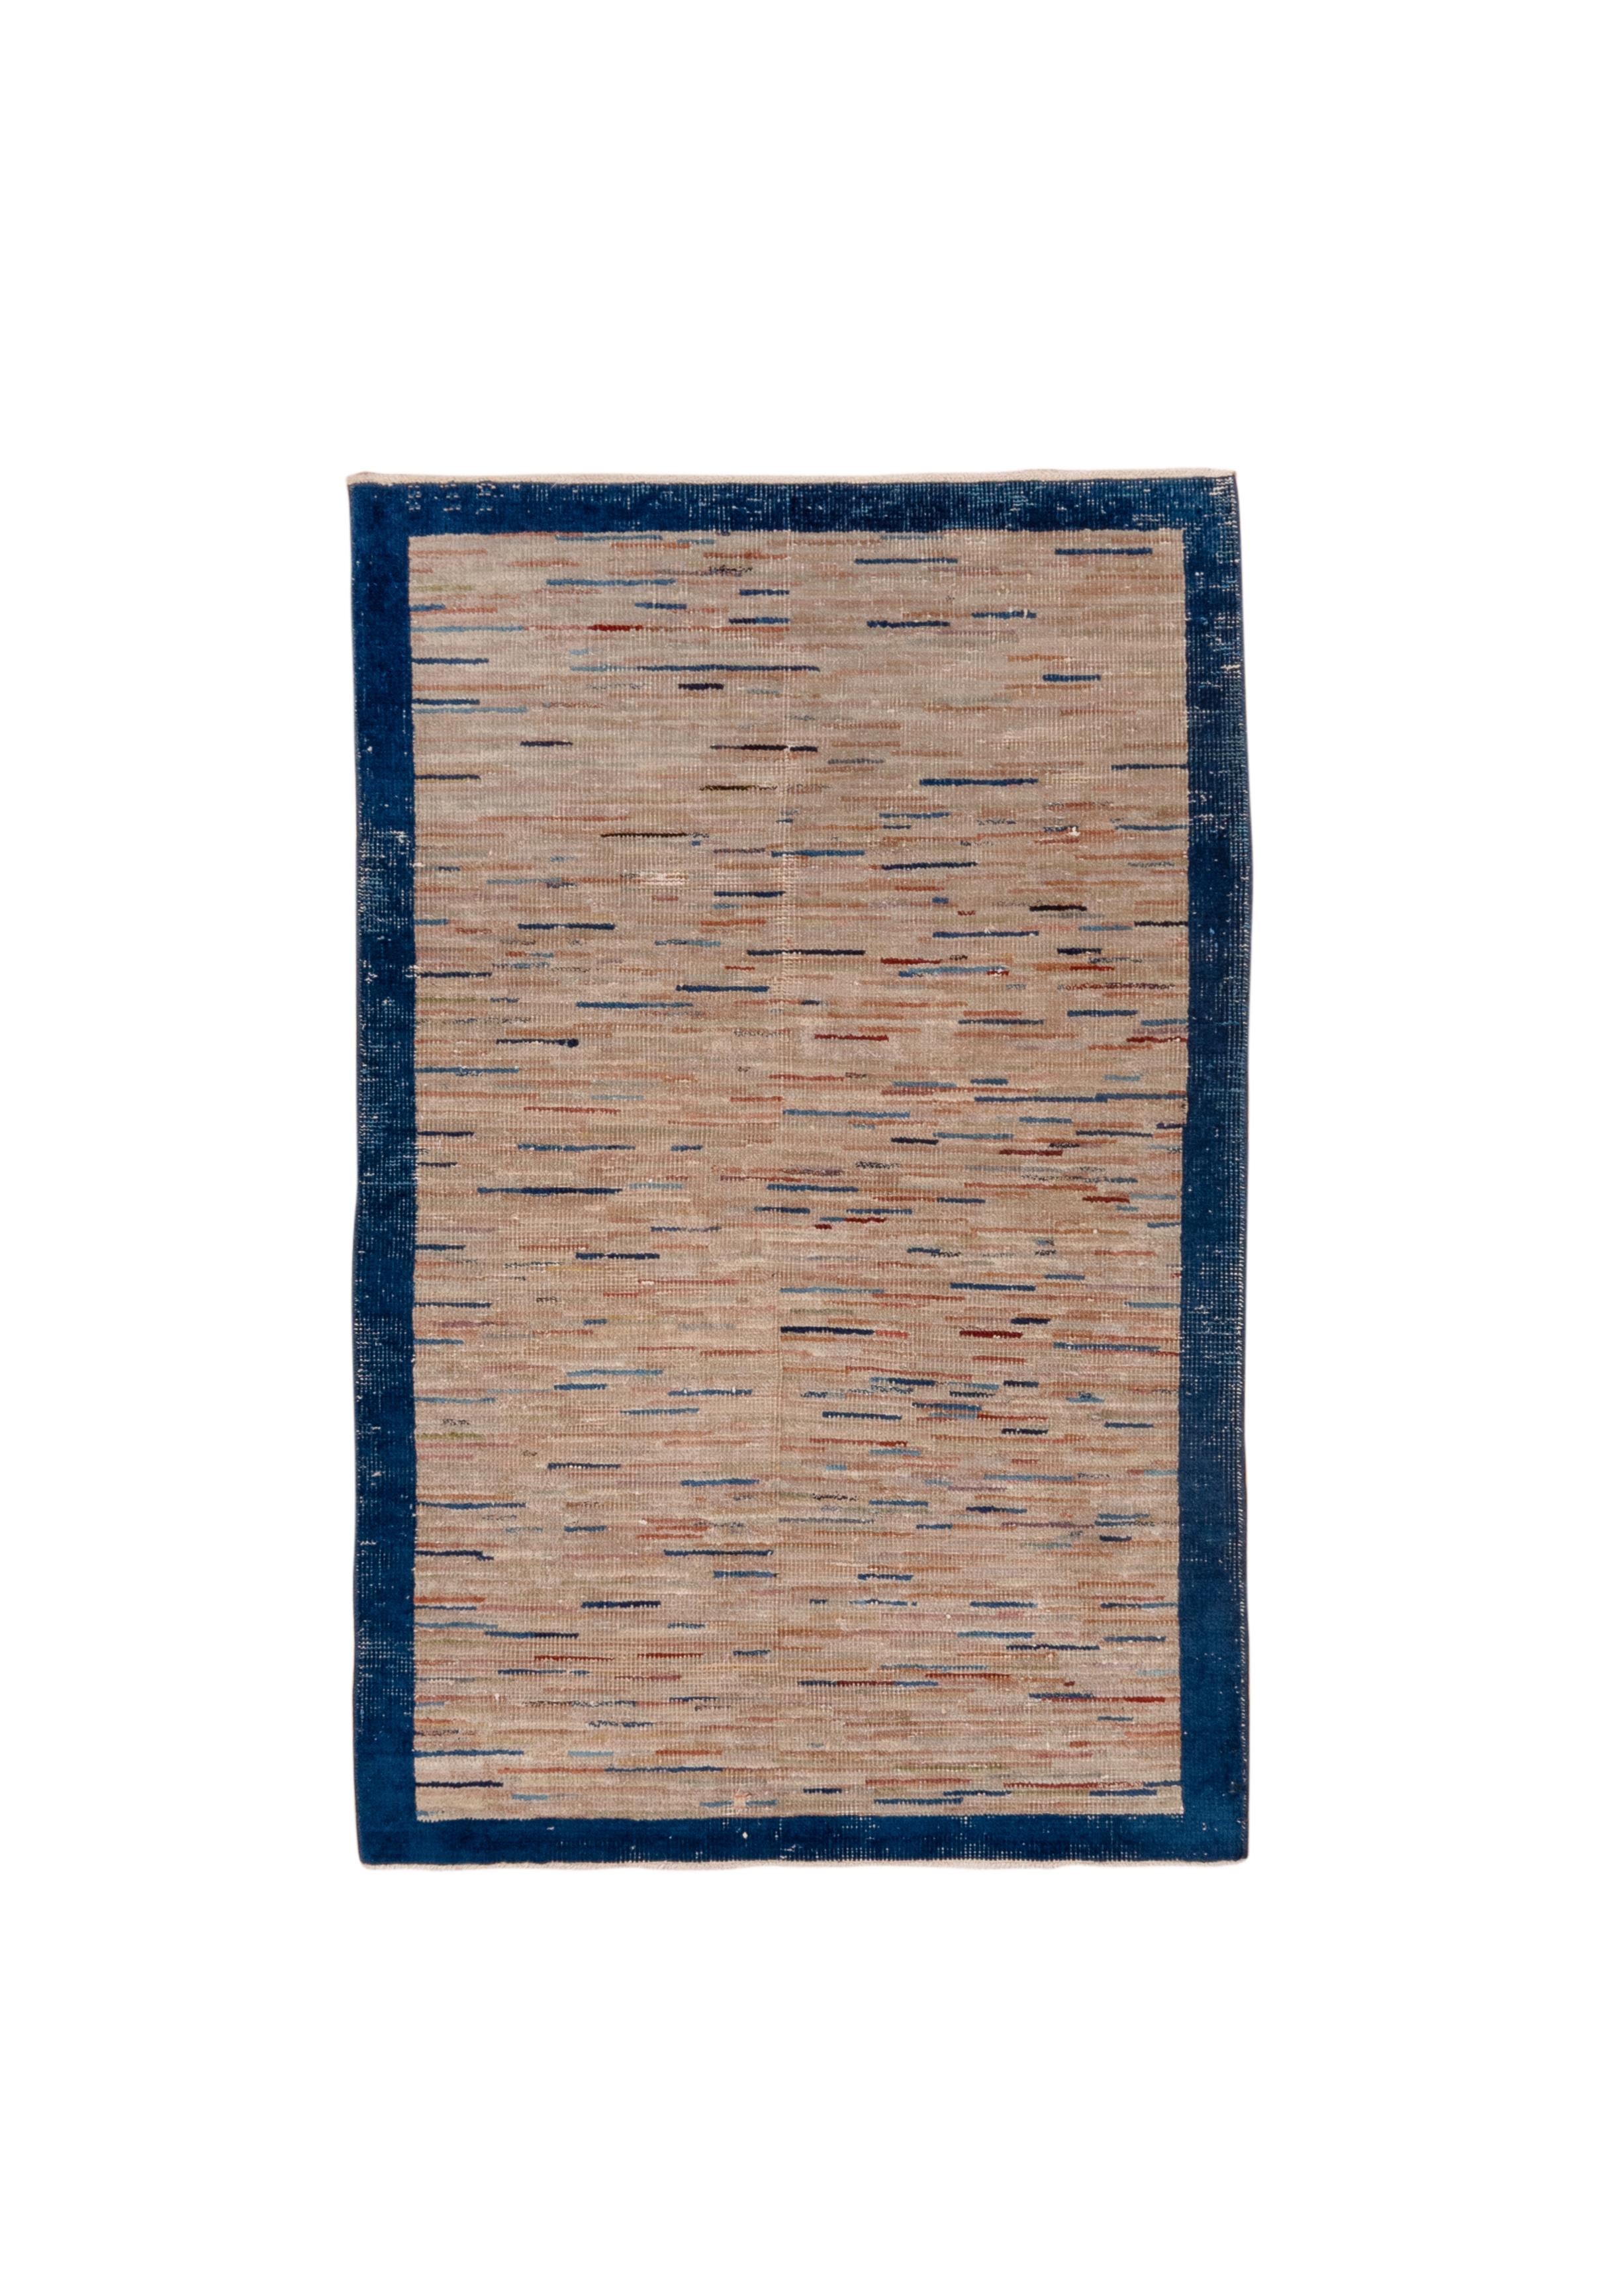 This is an “end of day” rug incorporating the yarn bits left over from weaving larger carpets.  The field is generally putty-toned, with lines in various blues and reds. Plain navy border. Wear ribbing to pile, but quite floorable withal. 

Rug